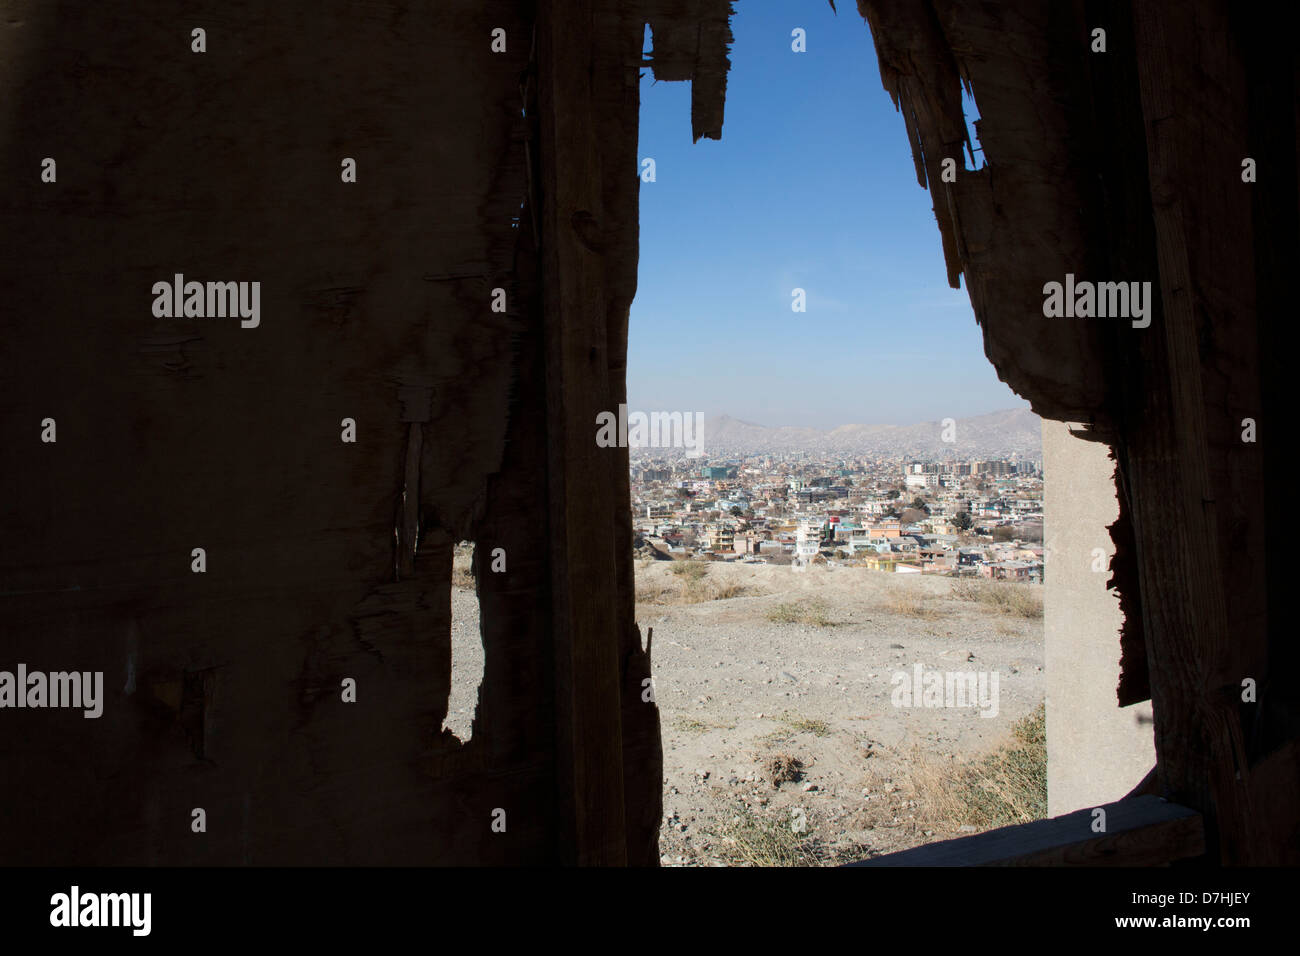 view on the city of Kabul, Afghanistan. Stock Photo